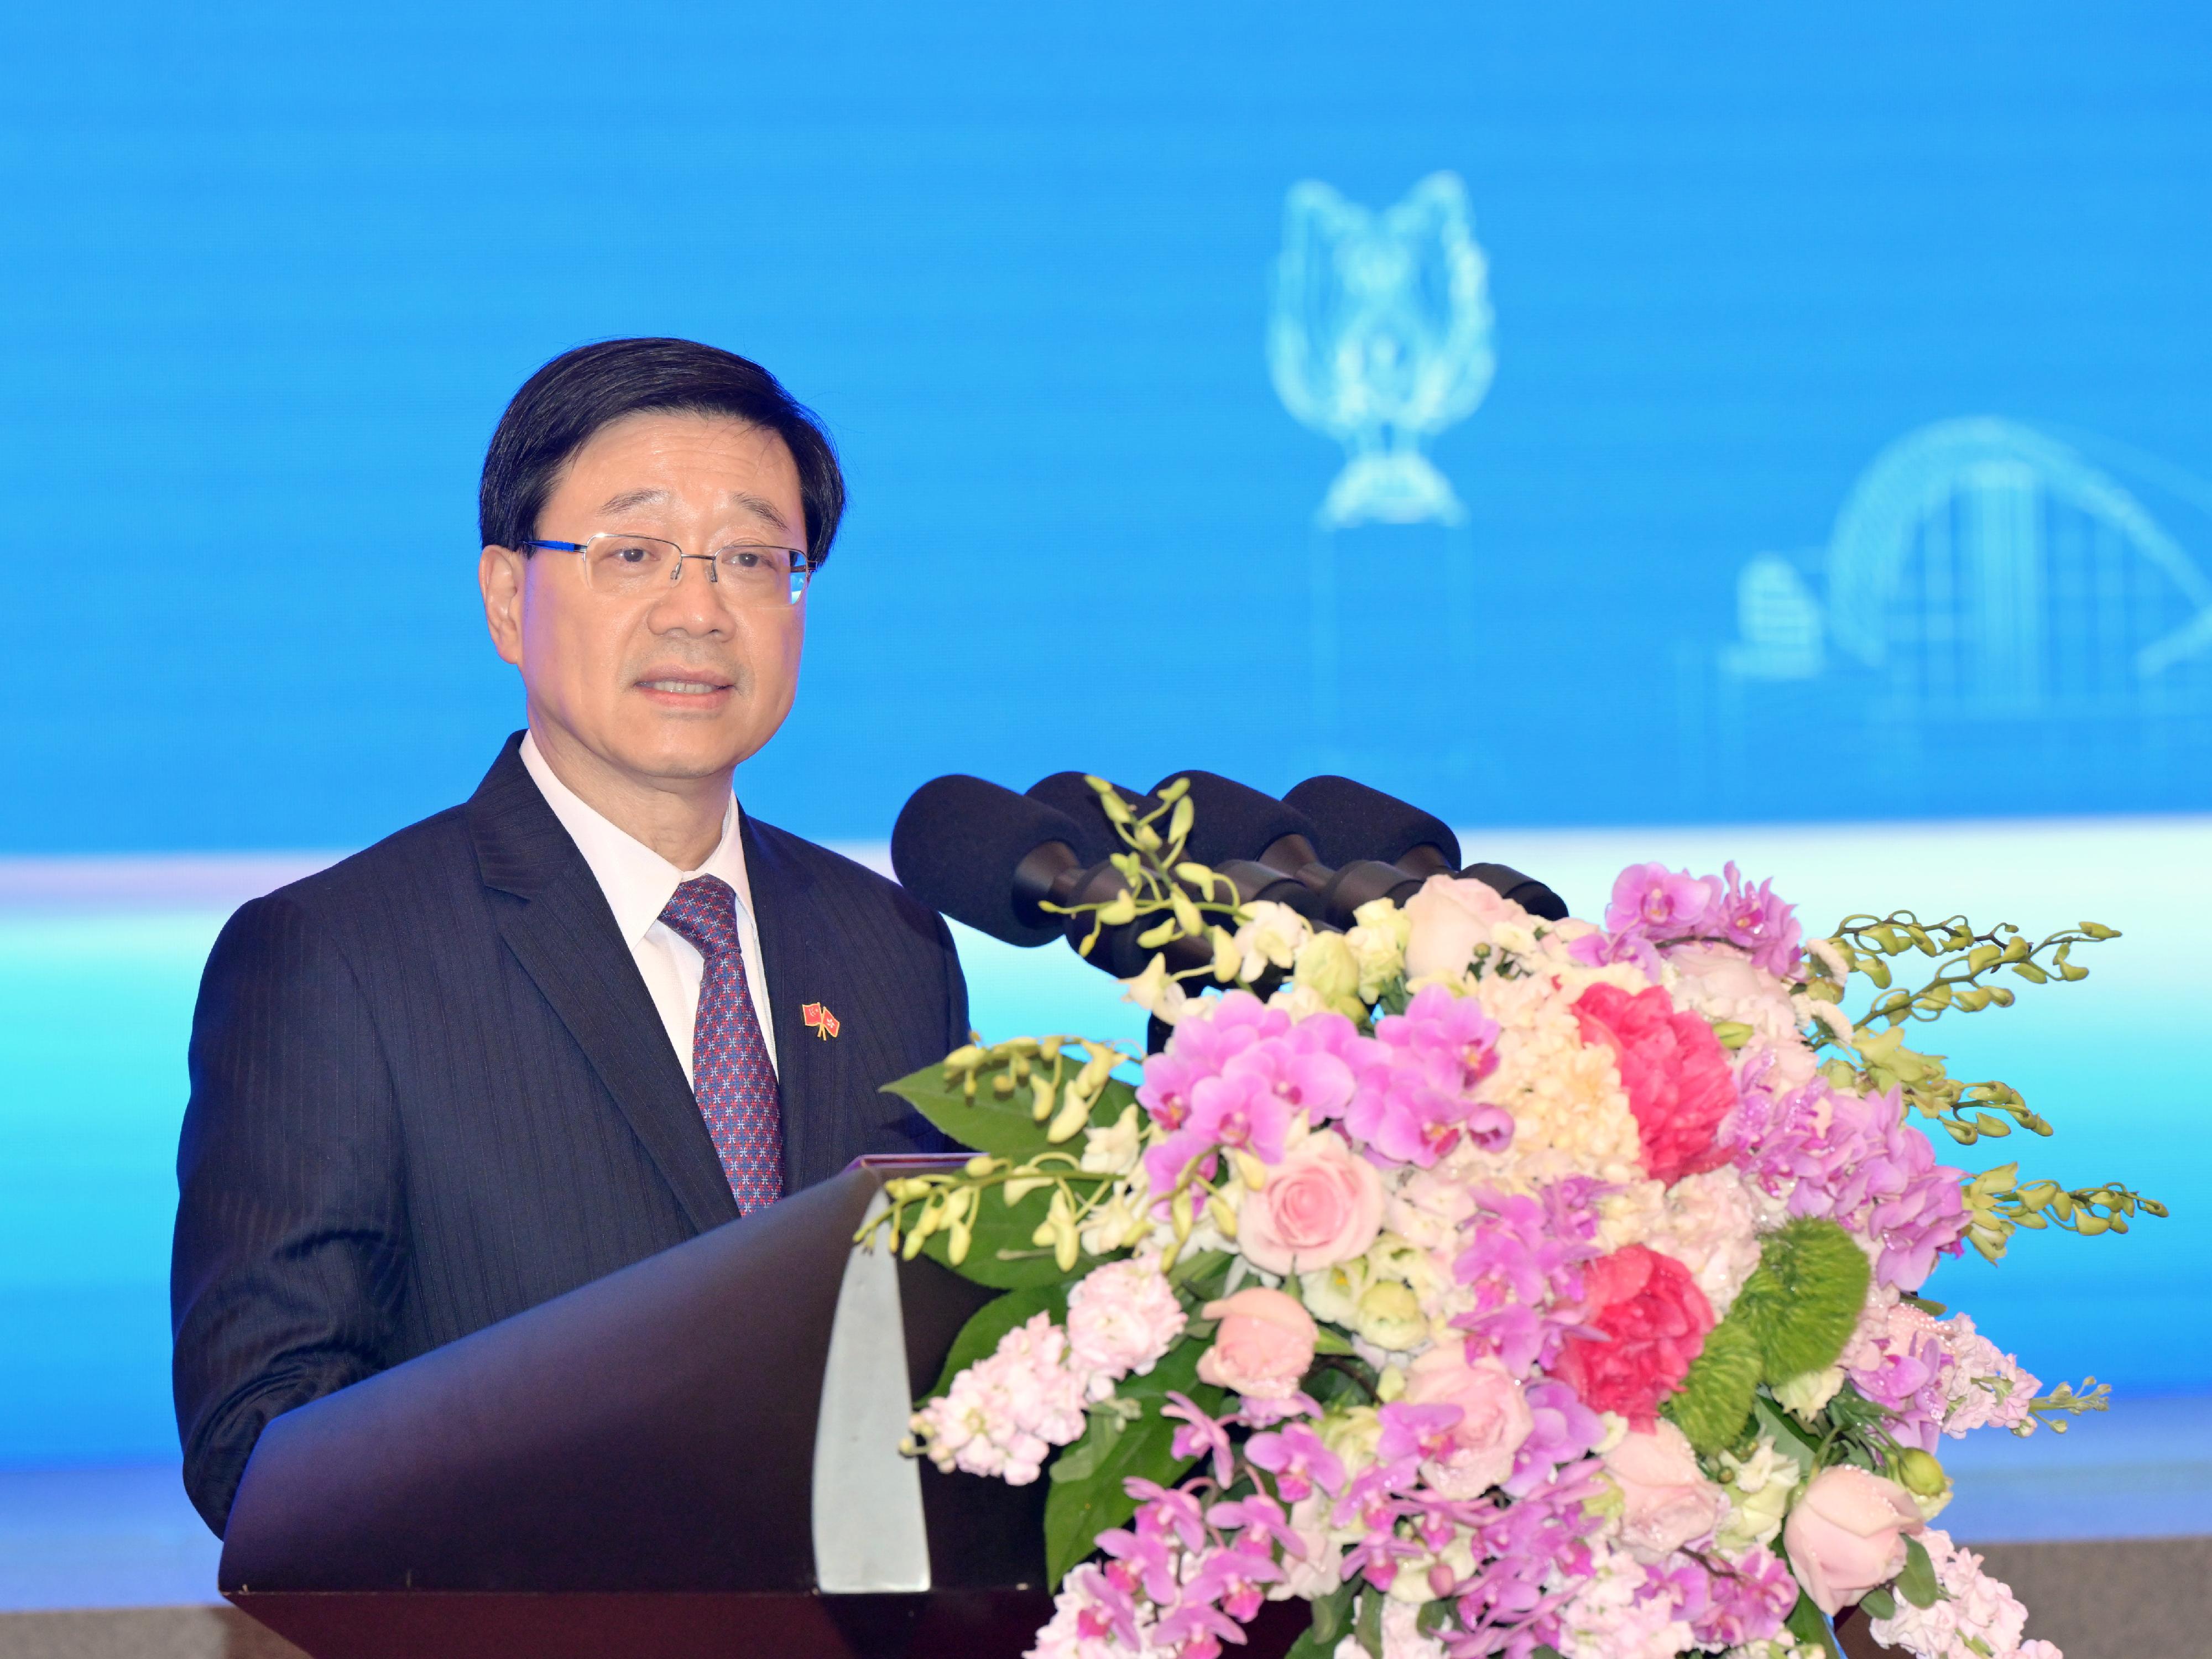 The Chief Executive, Mr John Lee, led a delegation of the Hong Kong Special Administrative Region Government and the Legislative Council to visit Guangdong-Hong Kong-Macao Greater Bay Area in Shenzhen today (April 21). Photo shows Mr Lee speaking at the dinner with leaders of Shenzhen Municipal Government.